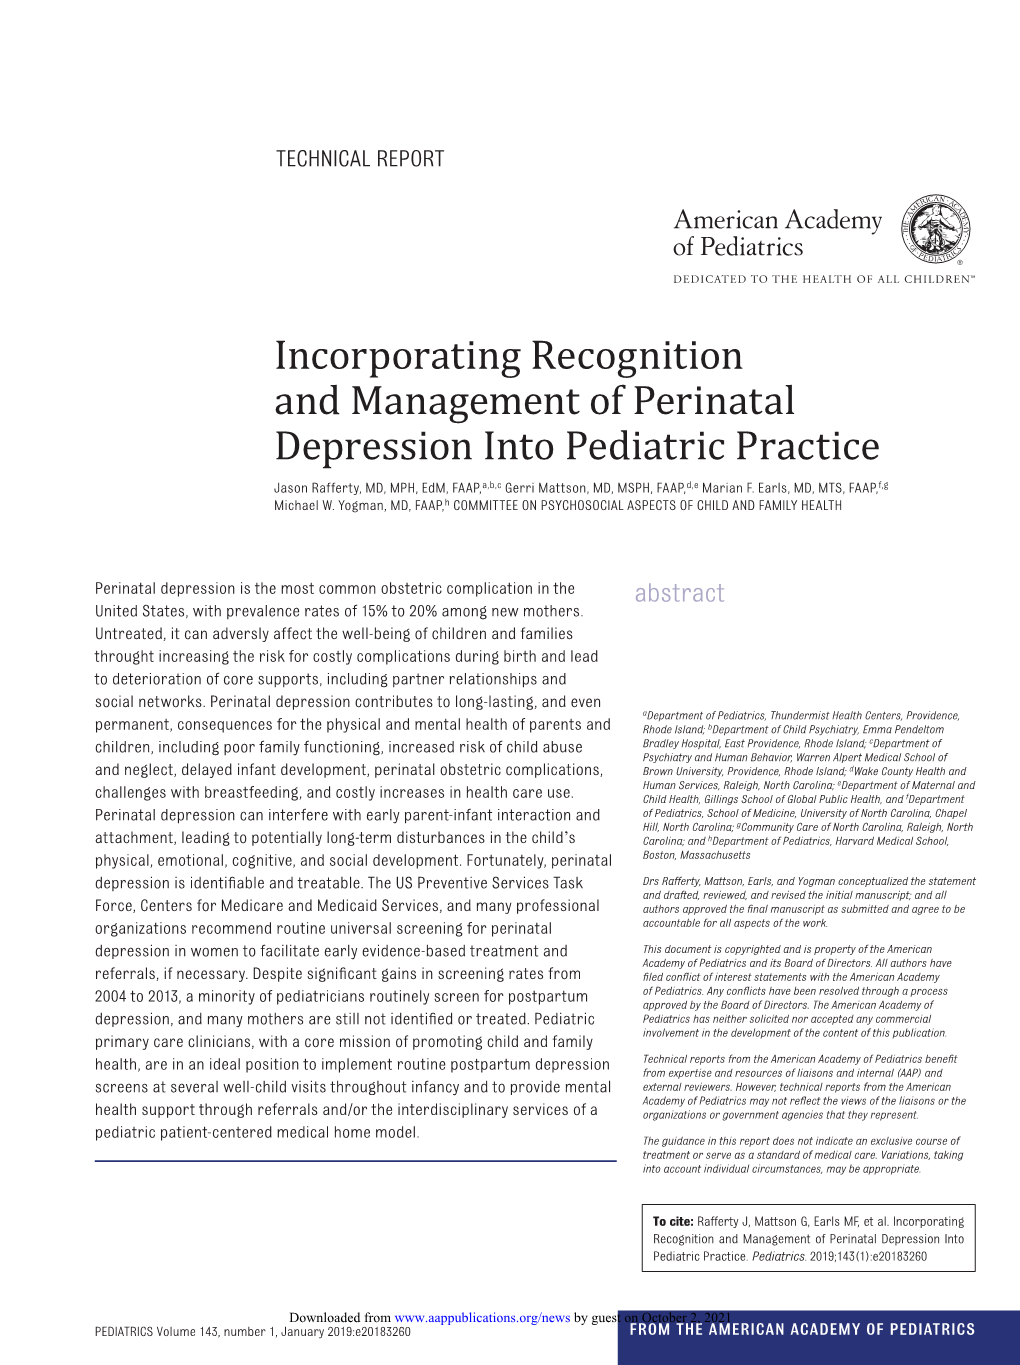 Incorporating Recognition and Management of Perinatal Depression Into Pediatric Practice